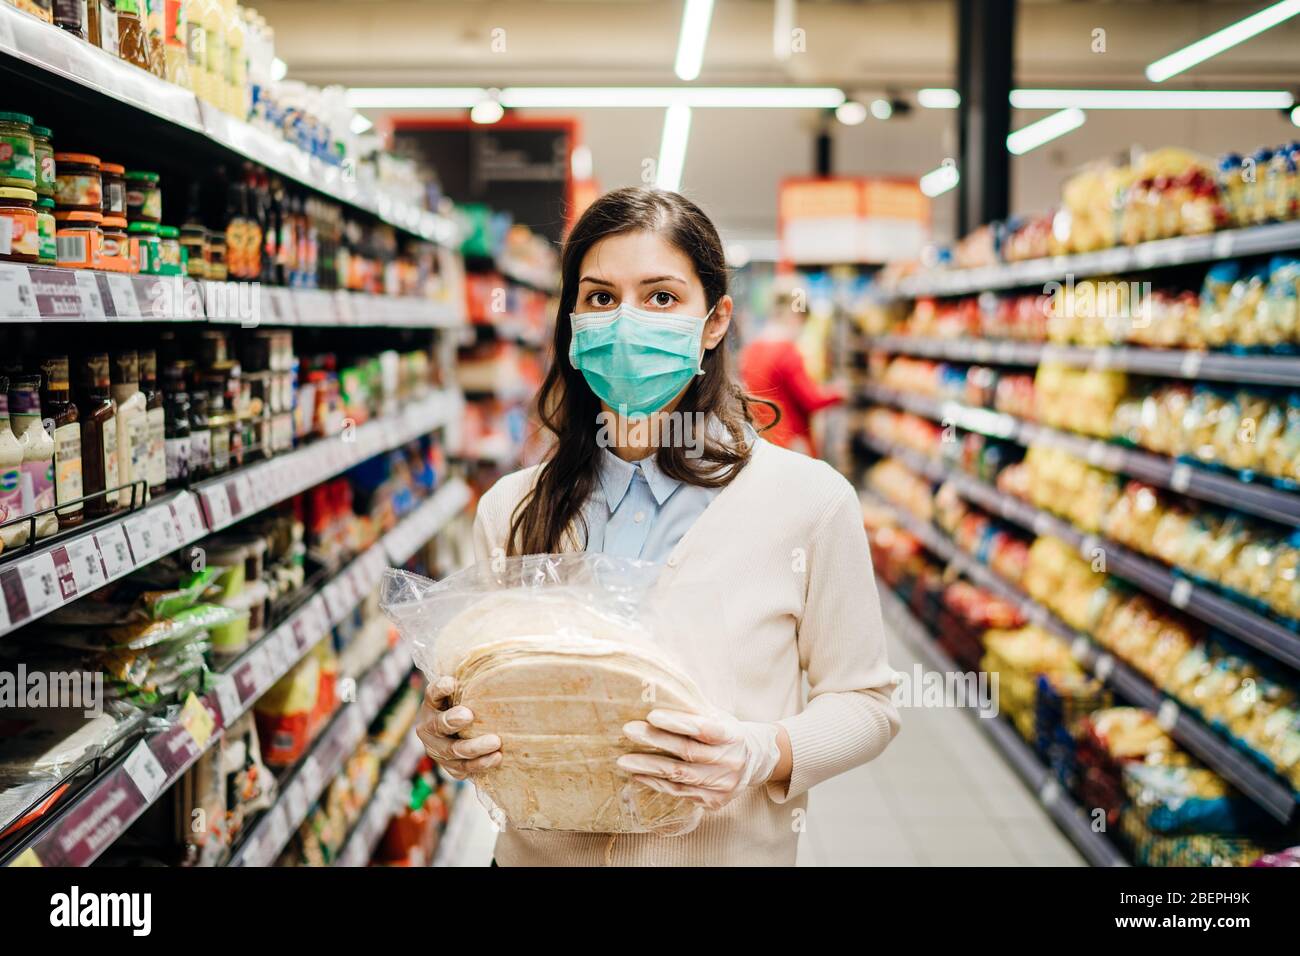 Scared shopper with mask safely shopping for groceries amid the coronavirus pandemic in stocked grocery store.COVID-19 food supermarket buying.Panic b Stock Photo